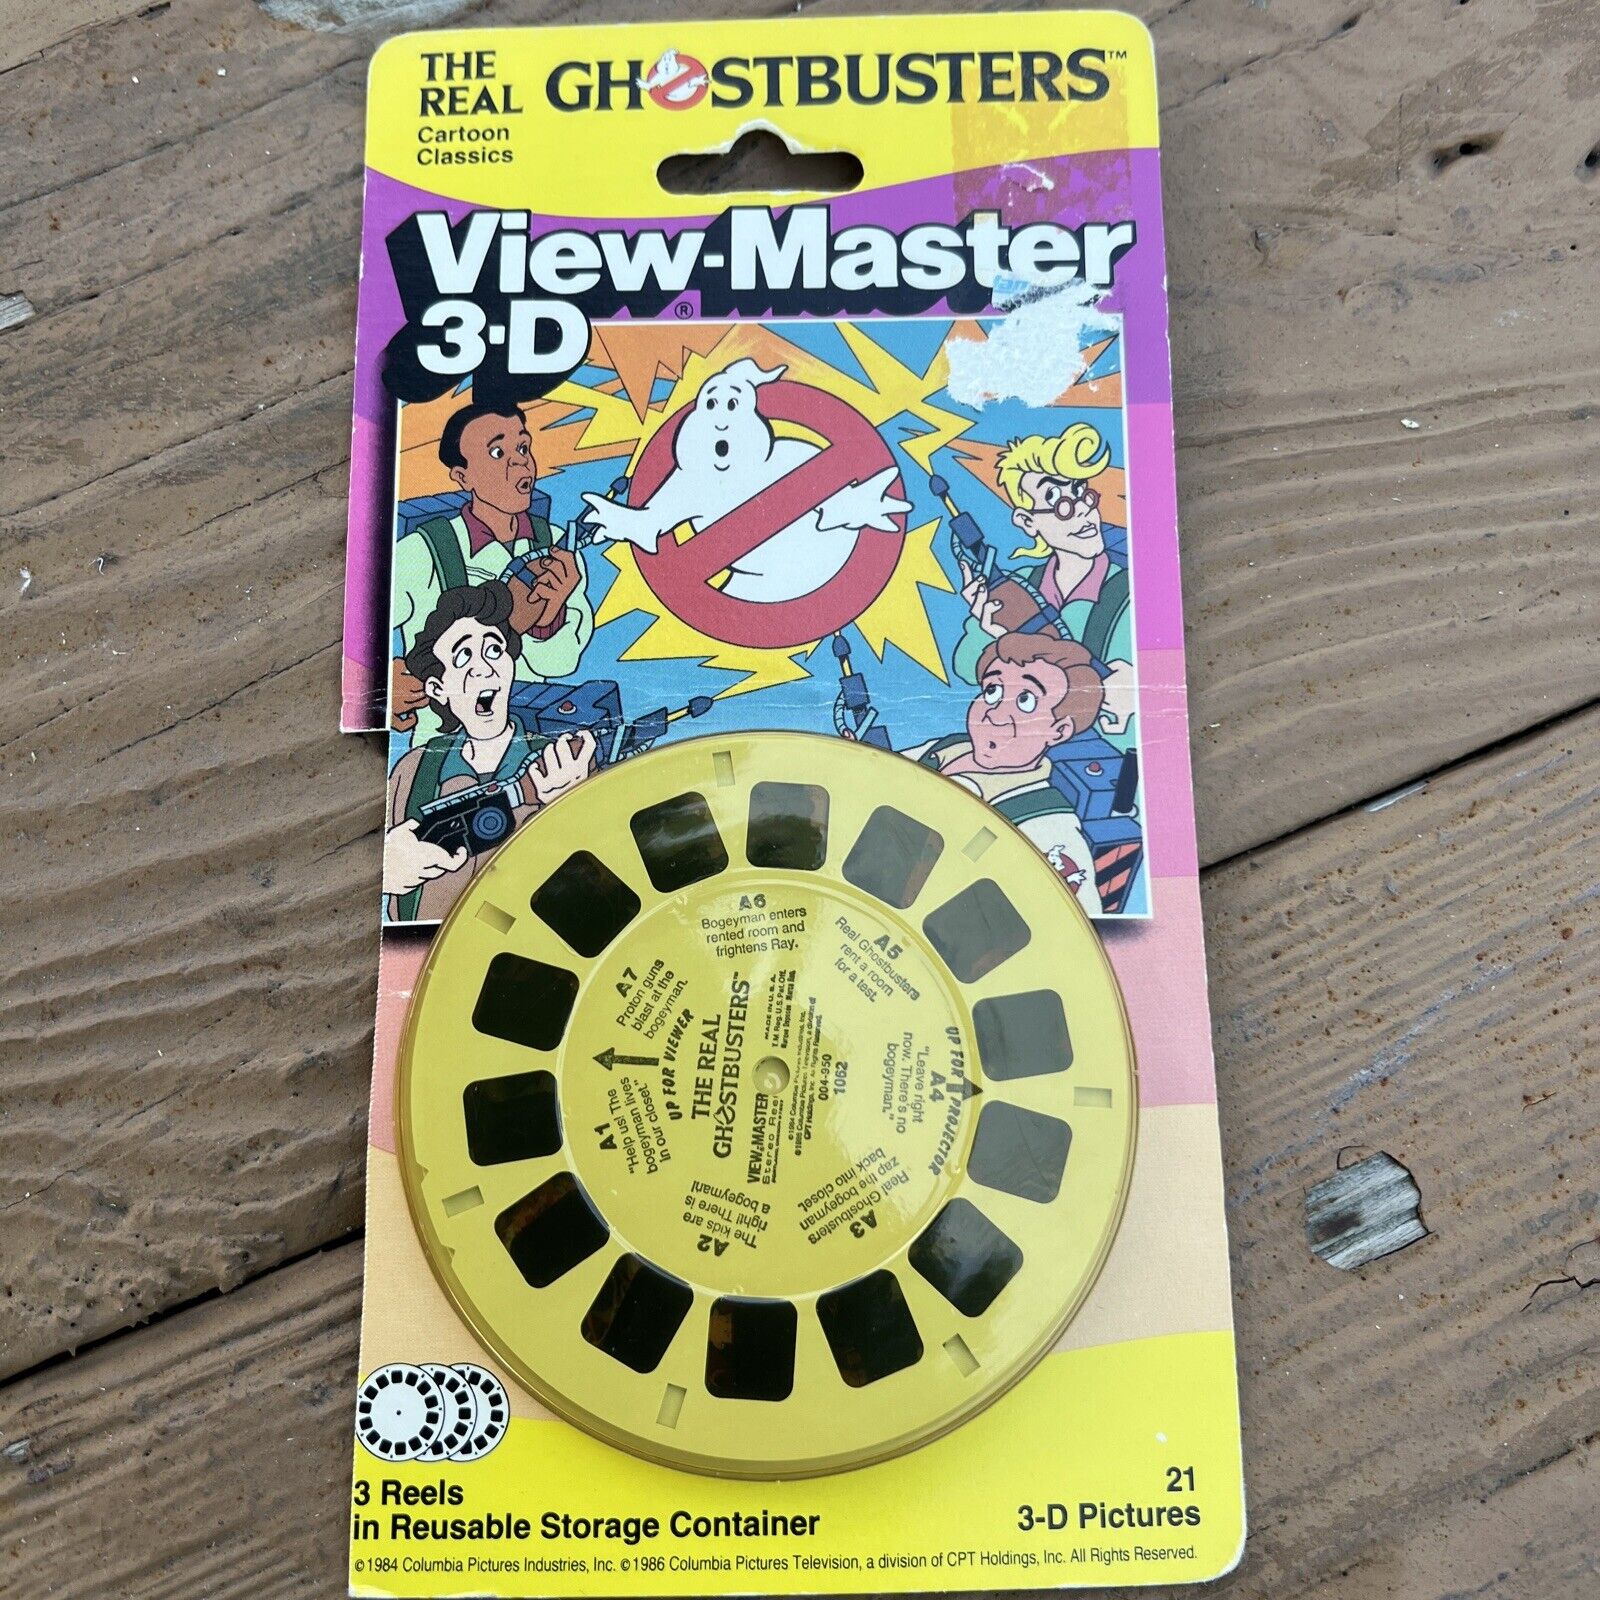 THE REAL GHOSTBUSTERS 3d View-Master 3 Reel Packet